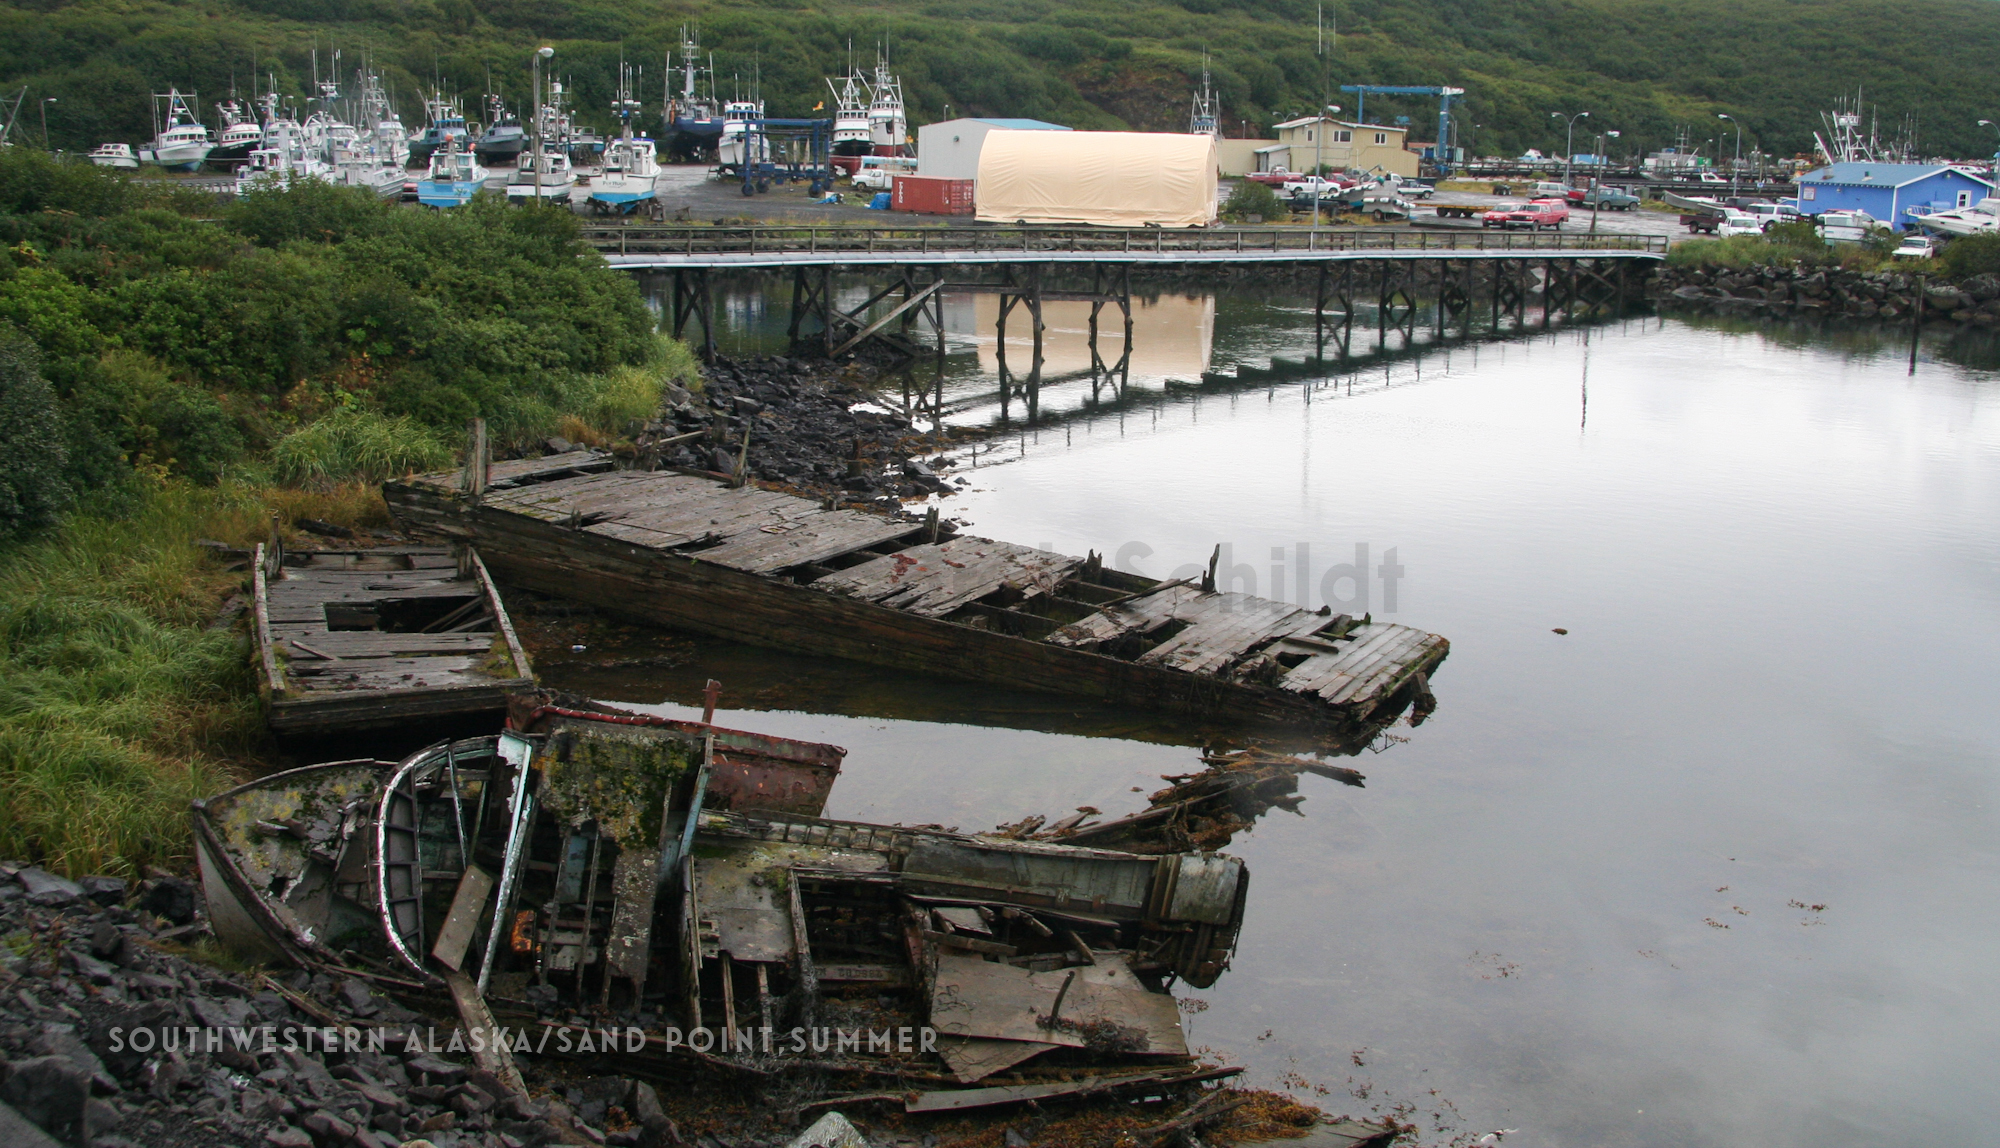 CT4 Southwestern Alaska:the Chain_ Sand Point late summer old boats copy.jpg